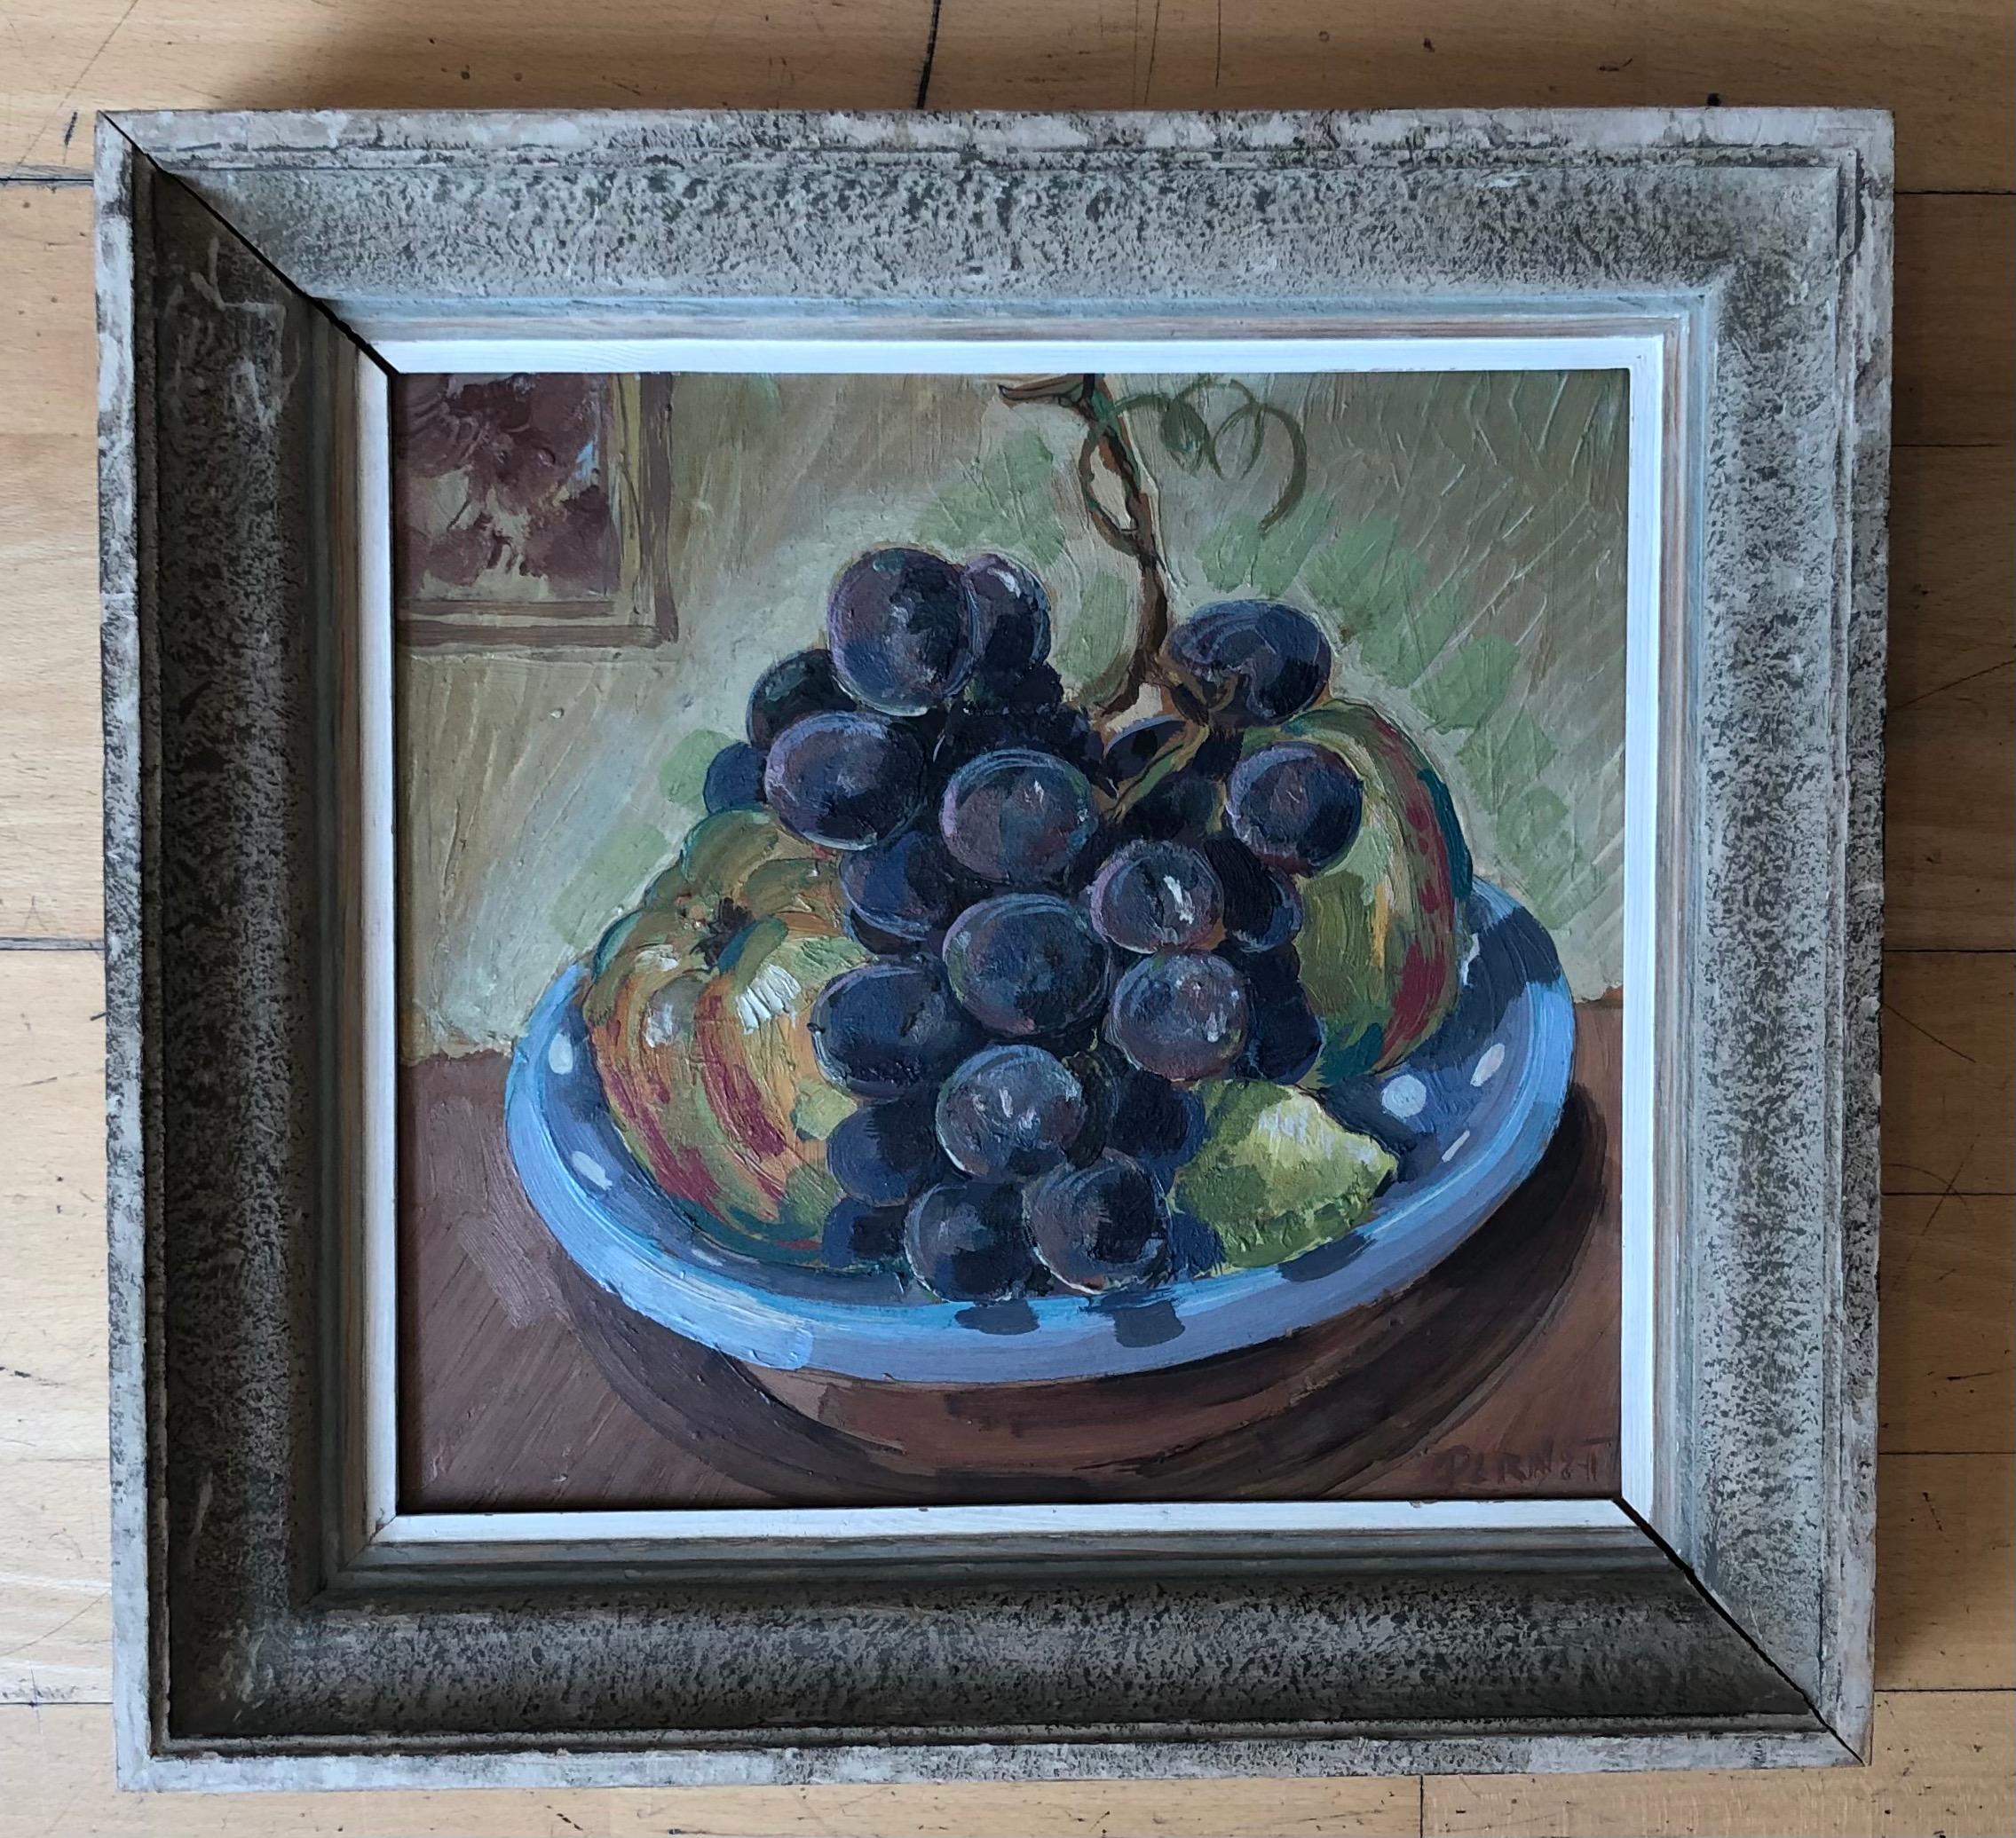 Fruit cup - Painting by Percival Pernet